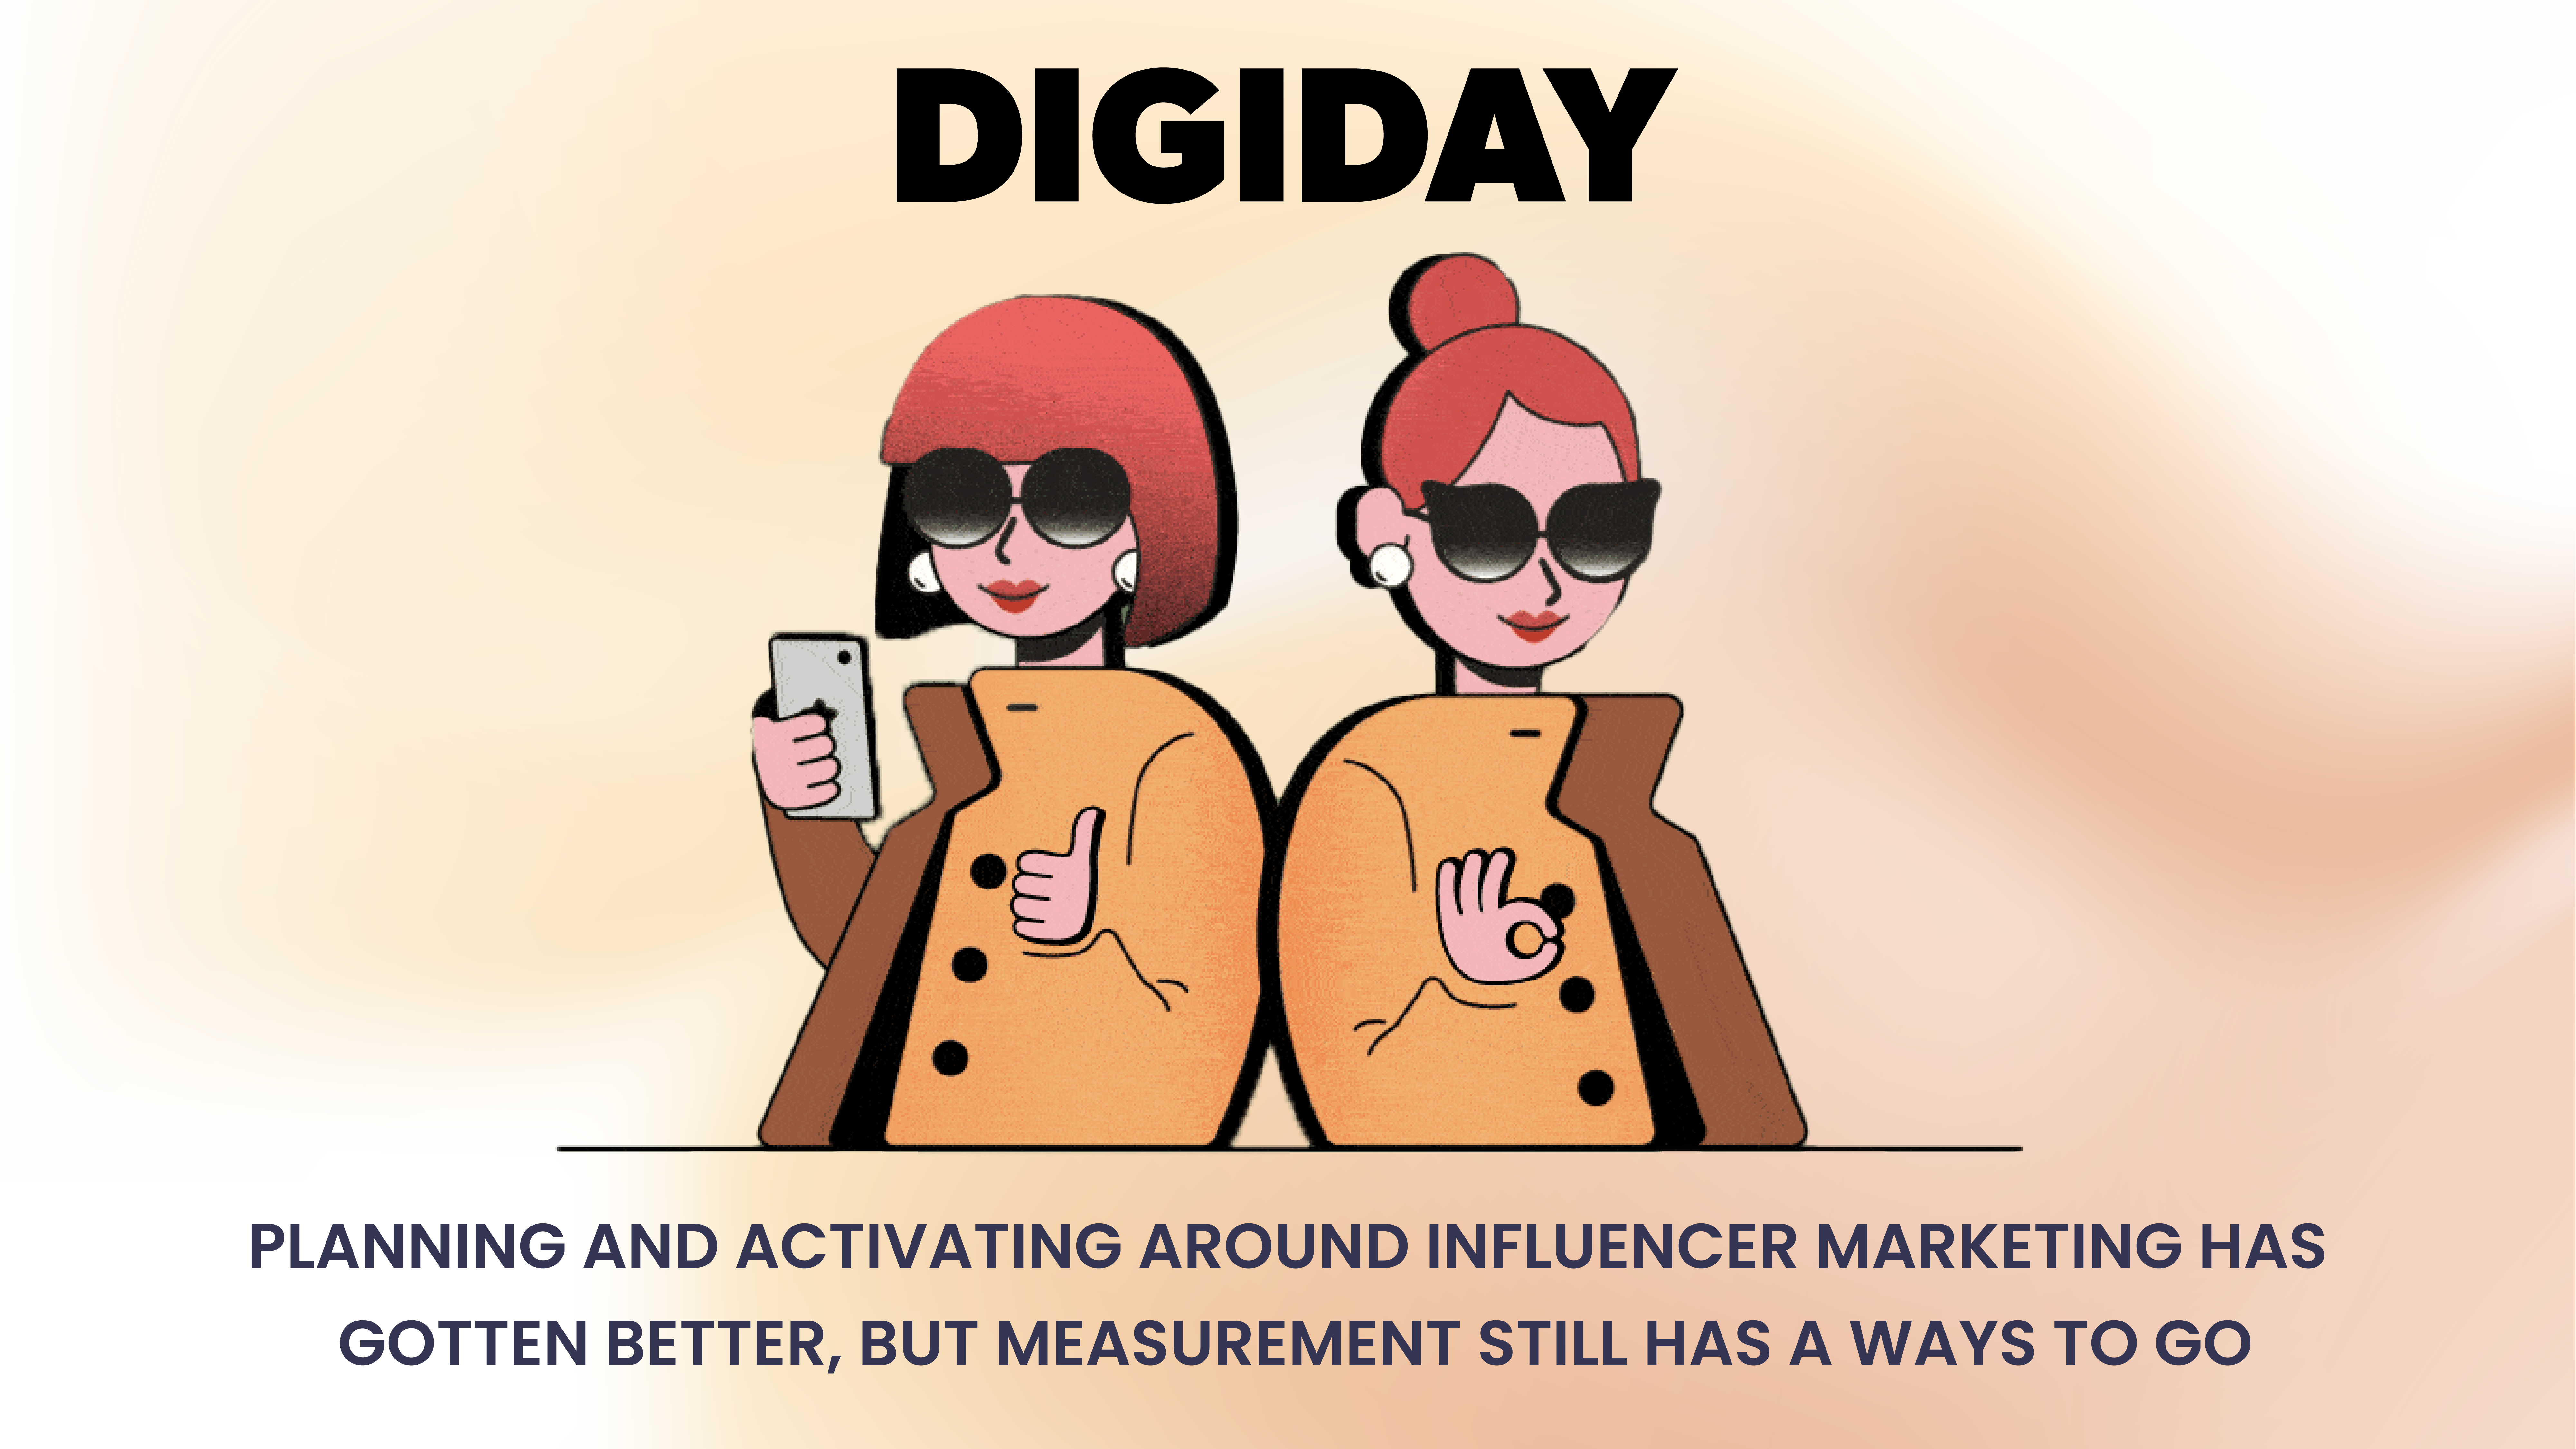 Media Buying Briefing: Planning and activating around influencer marketing has gotten better, but measurement still has a ways to go